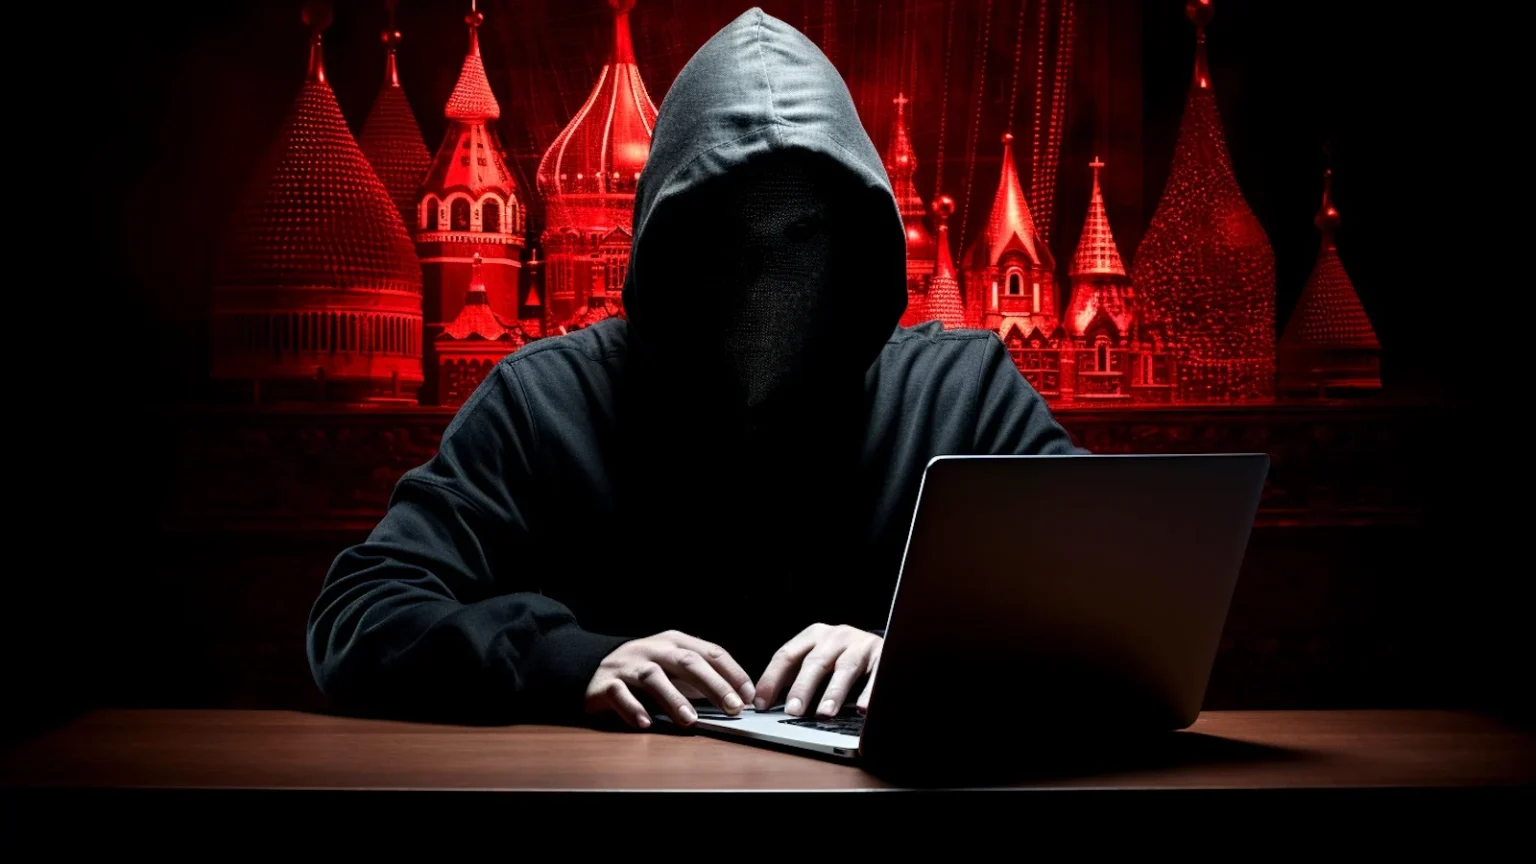 us-charges-russian-hacker-for-cyberattacks-on-ukraine-announced-10-million-reward